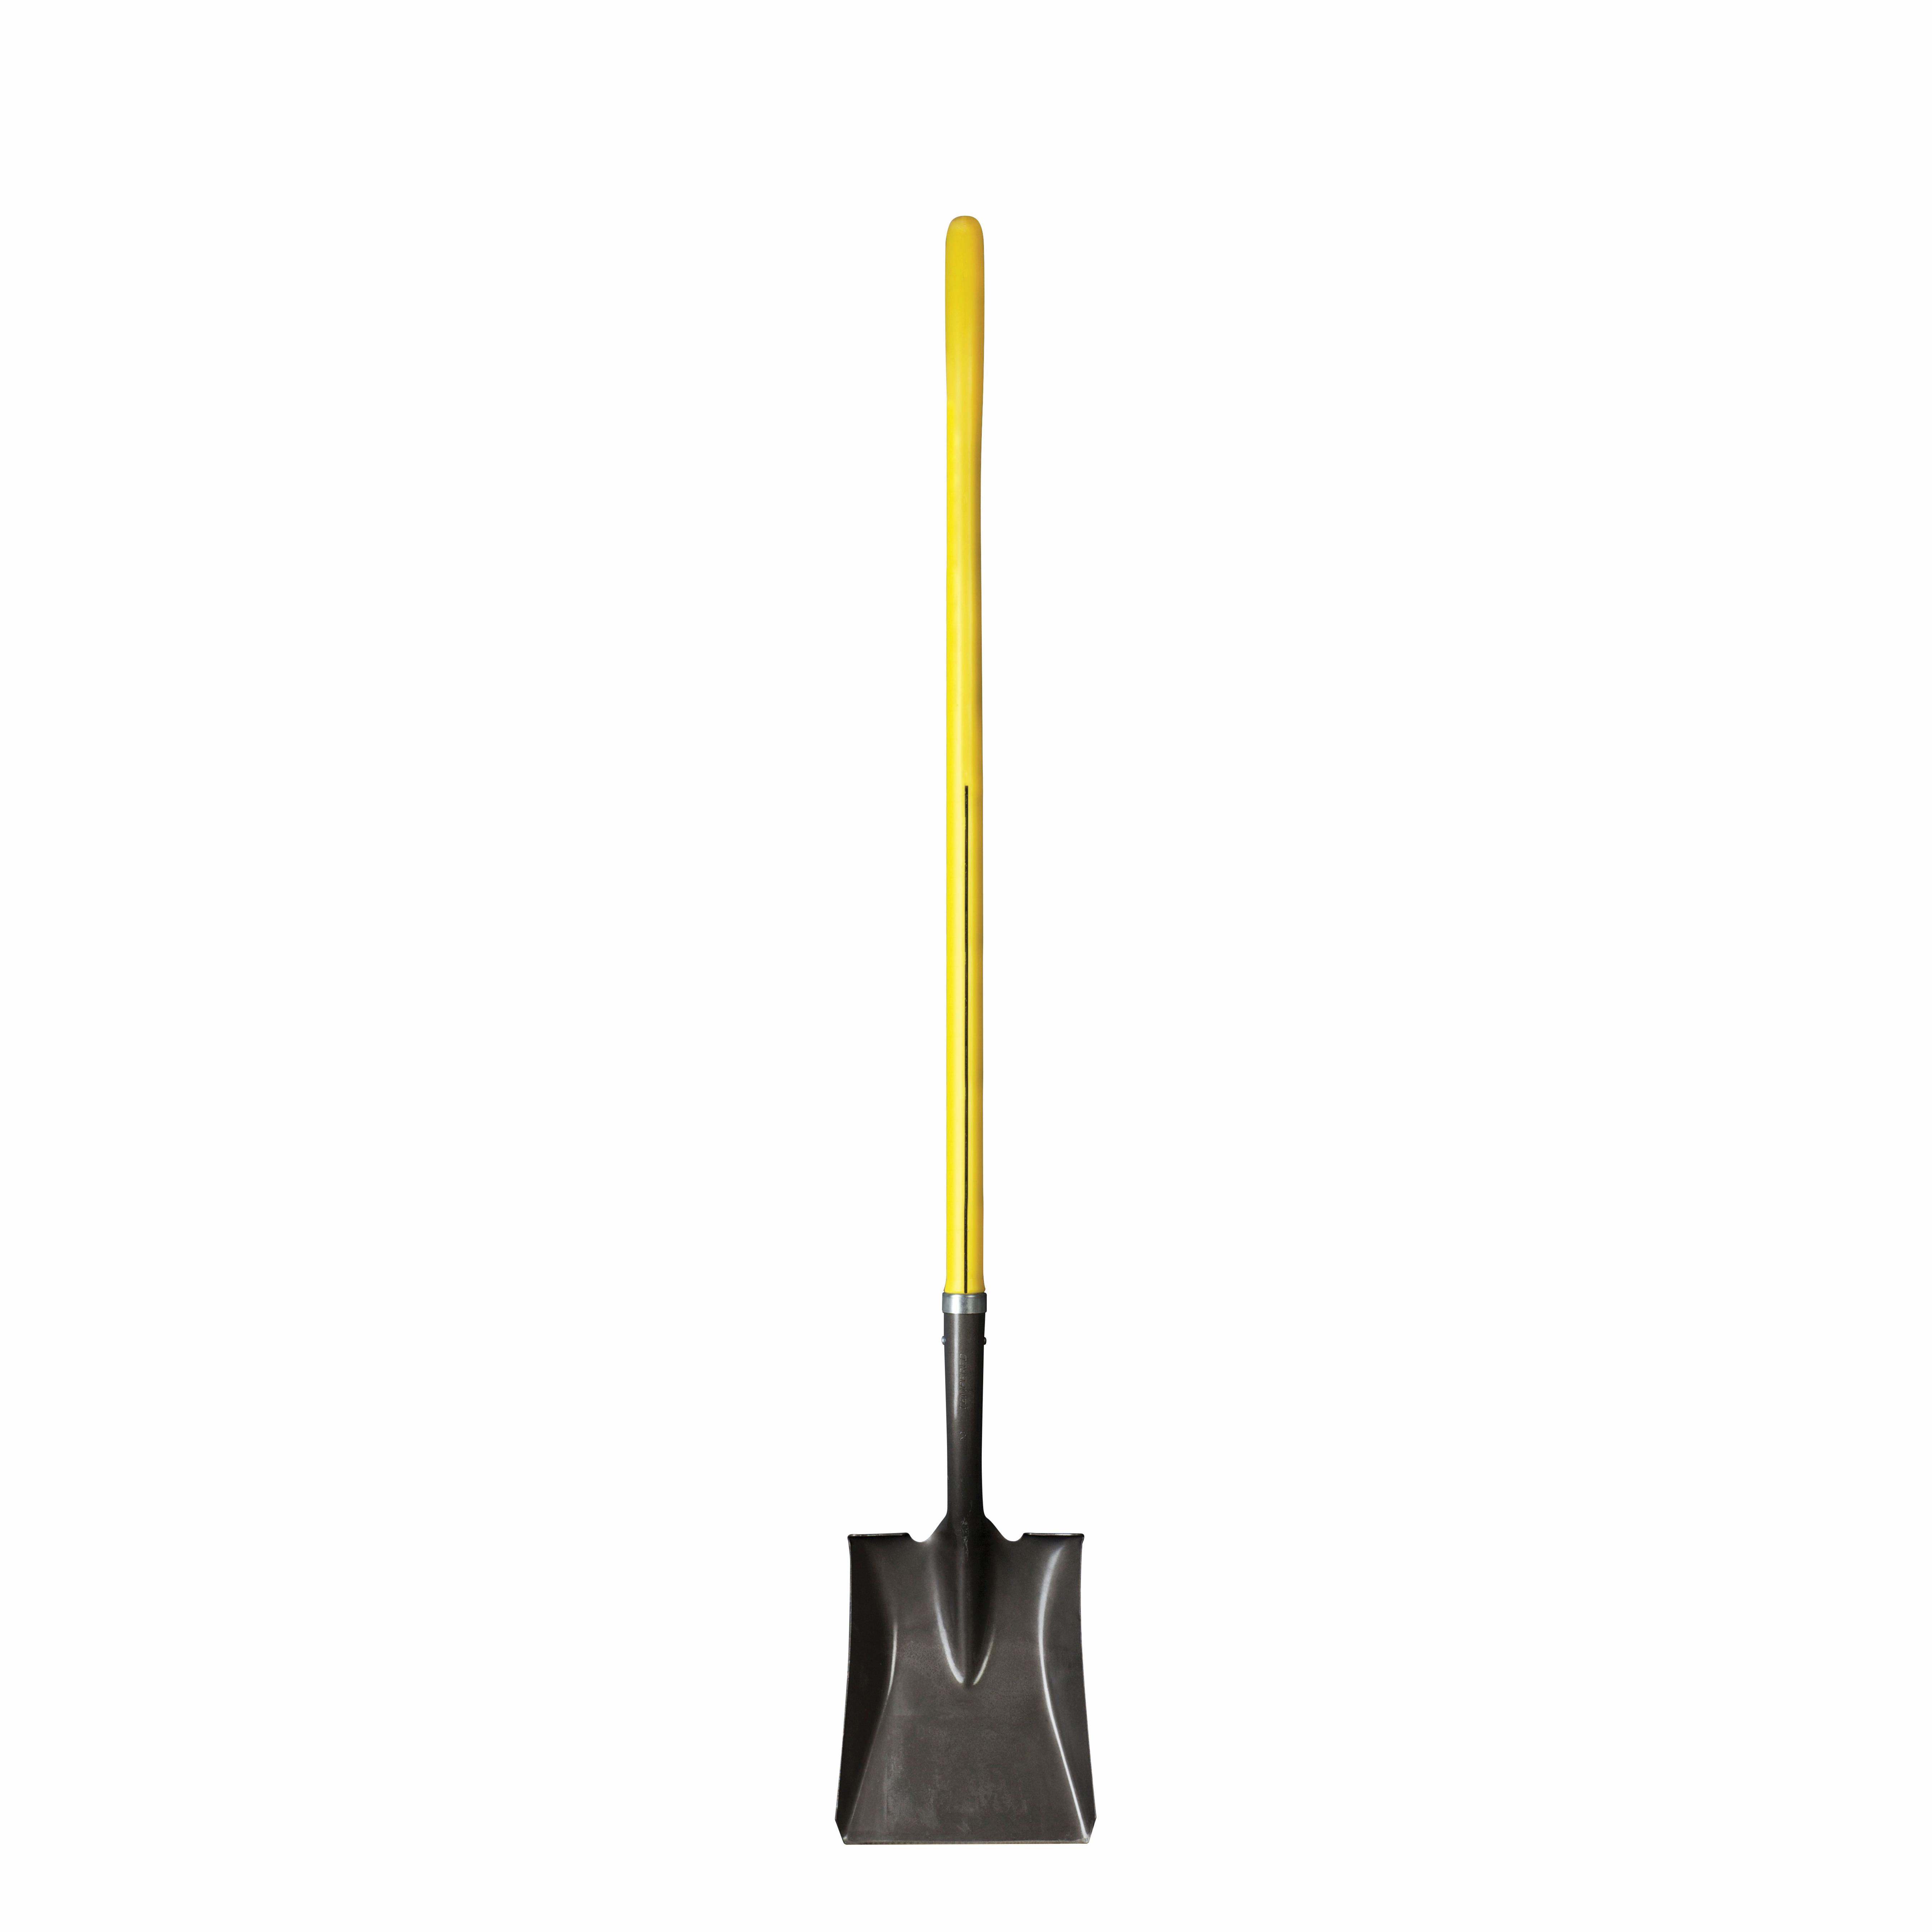 Nupla® Ergo-Power® Nuplaglas® 72075 Shovel, Industrial Grade Steel Blade, 11-1/2 in L x 9-7/8 in W, Square Point Blade Point, 48 in L Handle